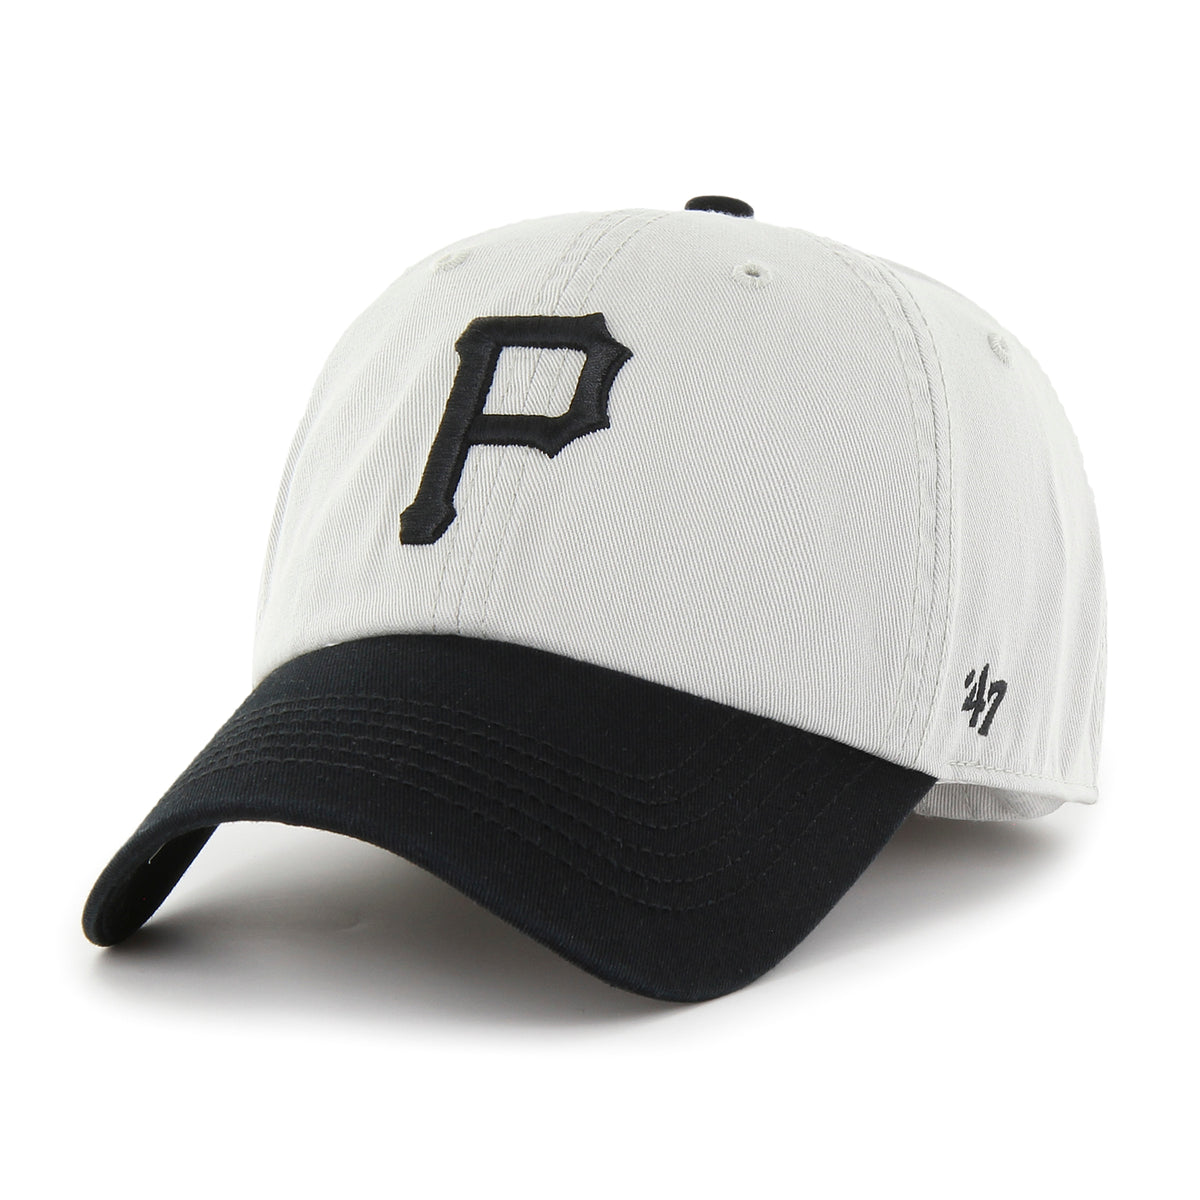 PITTSBURGH PIRATES COOPERSTOWN WORLD SERIES SURE SHOT CLASSIC TWO TONE '47 FRANCHISE